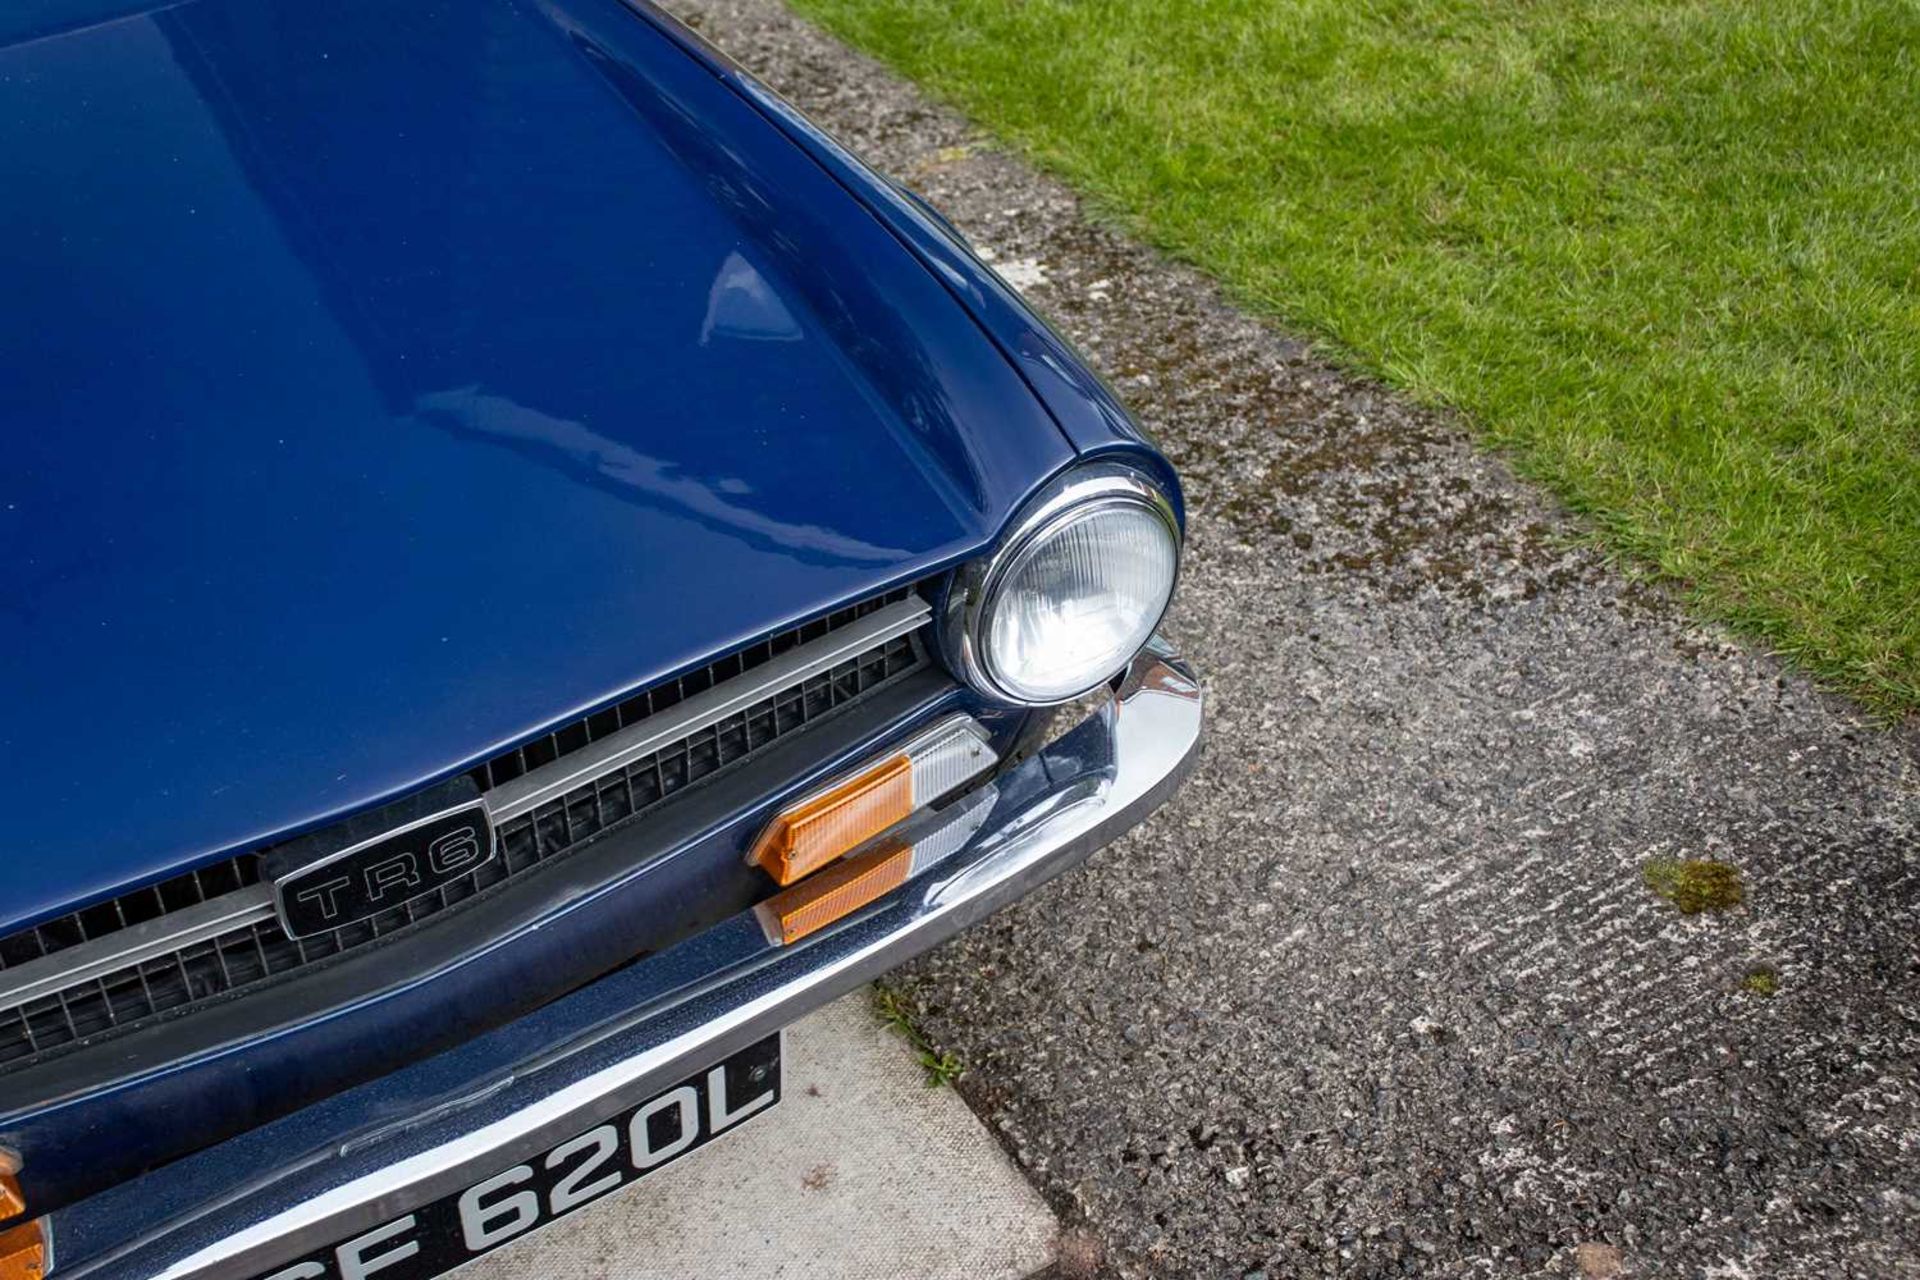 1972 Triumph TR6 Home market example, specified with manual overdrive transmission - Image 31 of 95